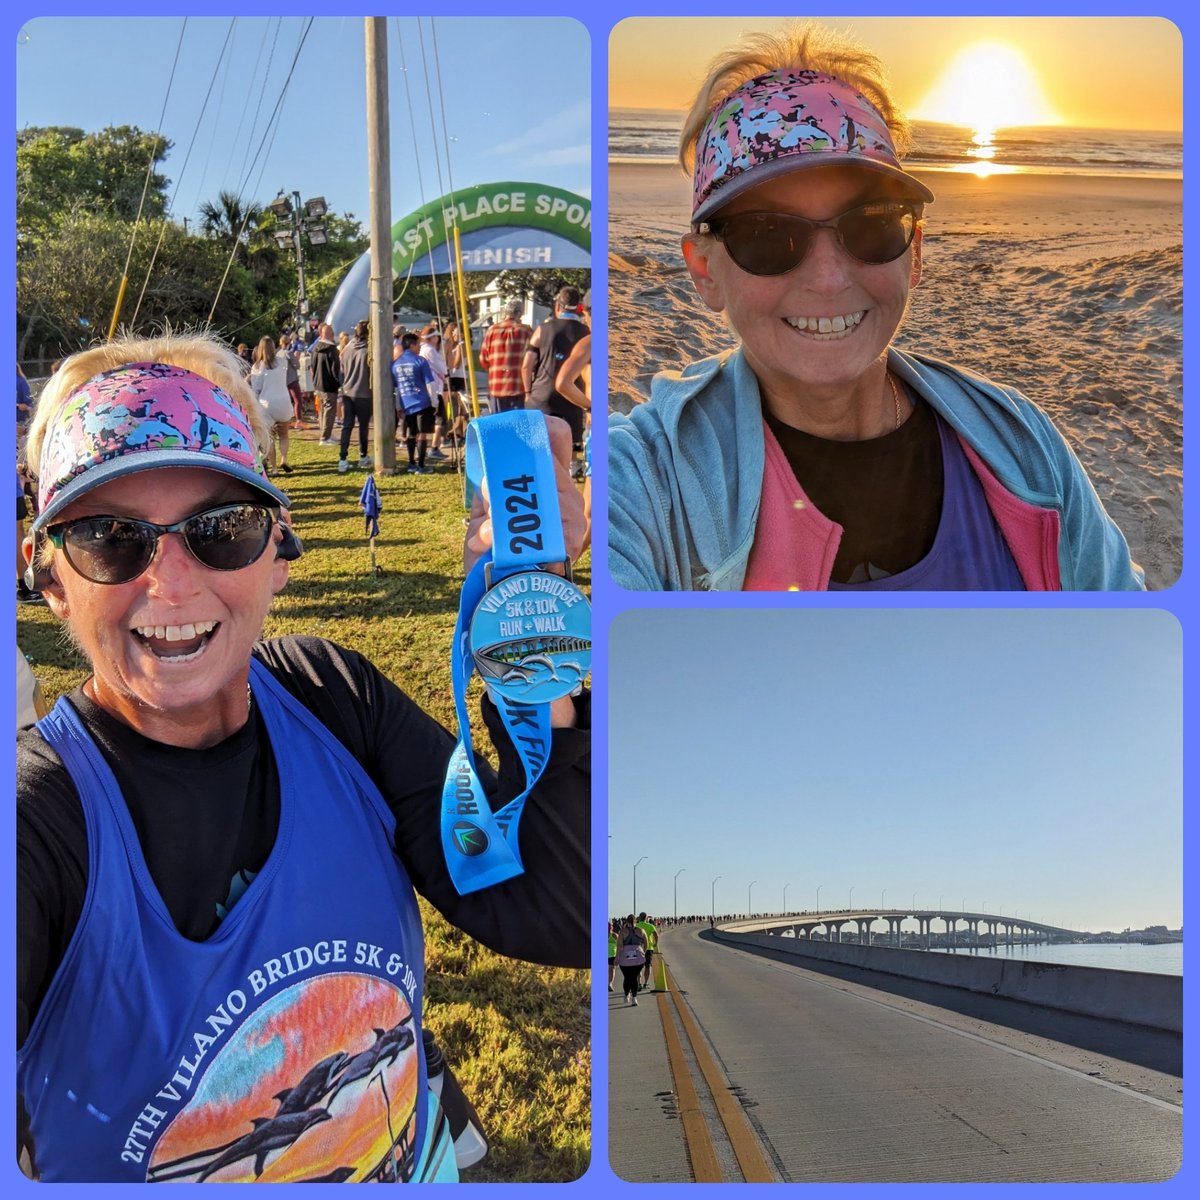 Awesome Sat morning at #vilanobeach @1stplacesports 🏃‍♀️🌉☀️ No wind at #vilanobridge Run #staugustine 😍 4th place age group #5k finish for me - progress, training, & more to do 😎 WooHoo! #happyeaster wknd 🐰 #keepmoving 🌉🏃‍♀️
#running #fitness  #runnersofinstagram #womensrunning